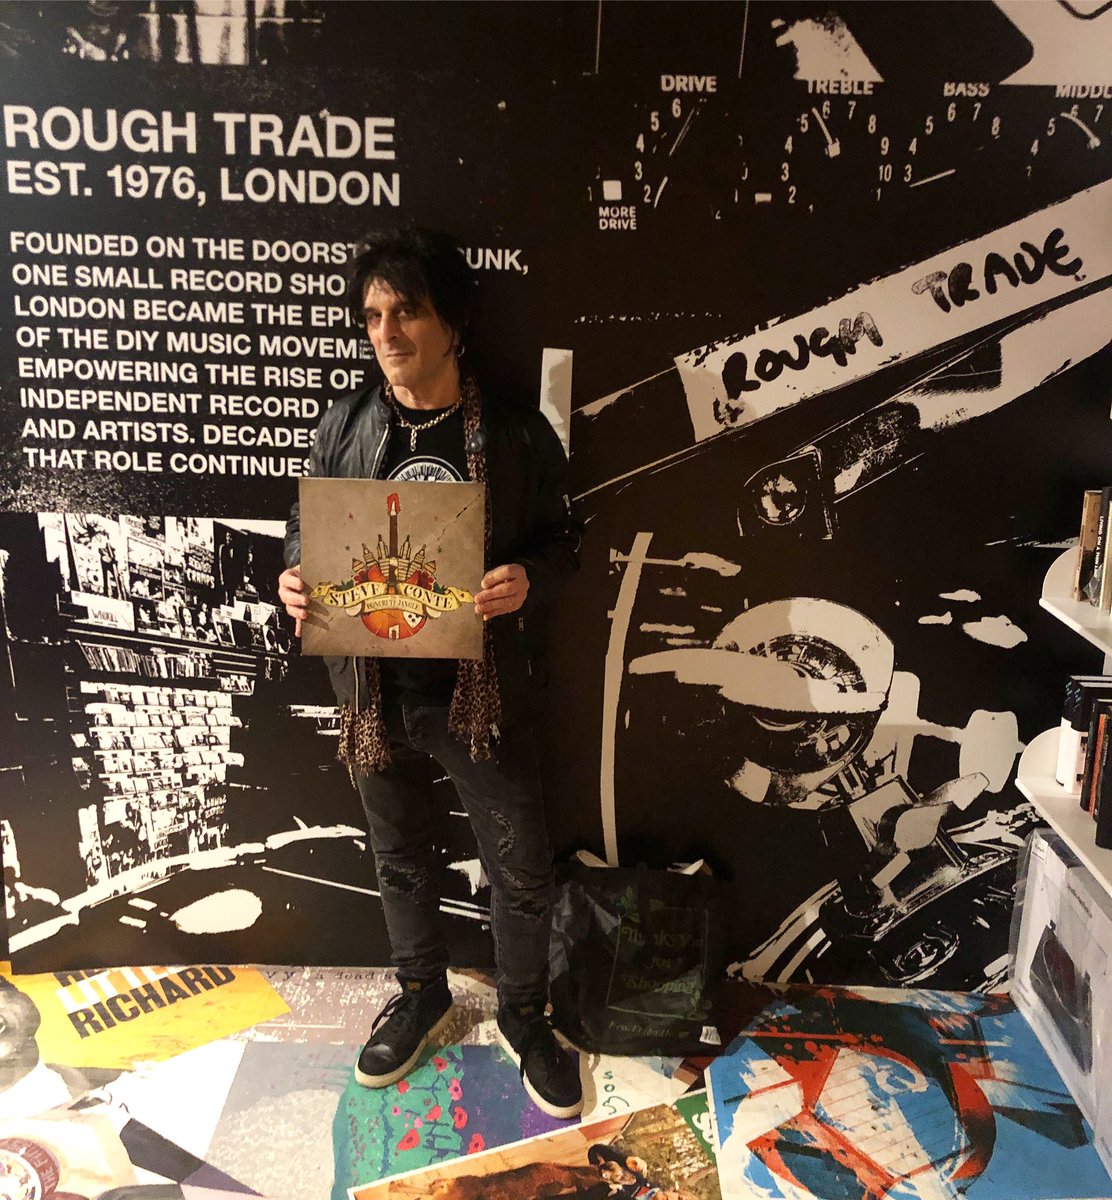 Record Store Day 4/20- Get to your participating local Indie Record Shop to get yourself a copy of my new album, The Concrete Jangle - on VINYL! (Side A written by XTC’s Andy Partridge & me, Side B written by me) #steveconte #theconcretejangle #recordstoreday #andypartridge #xtc